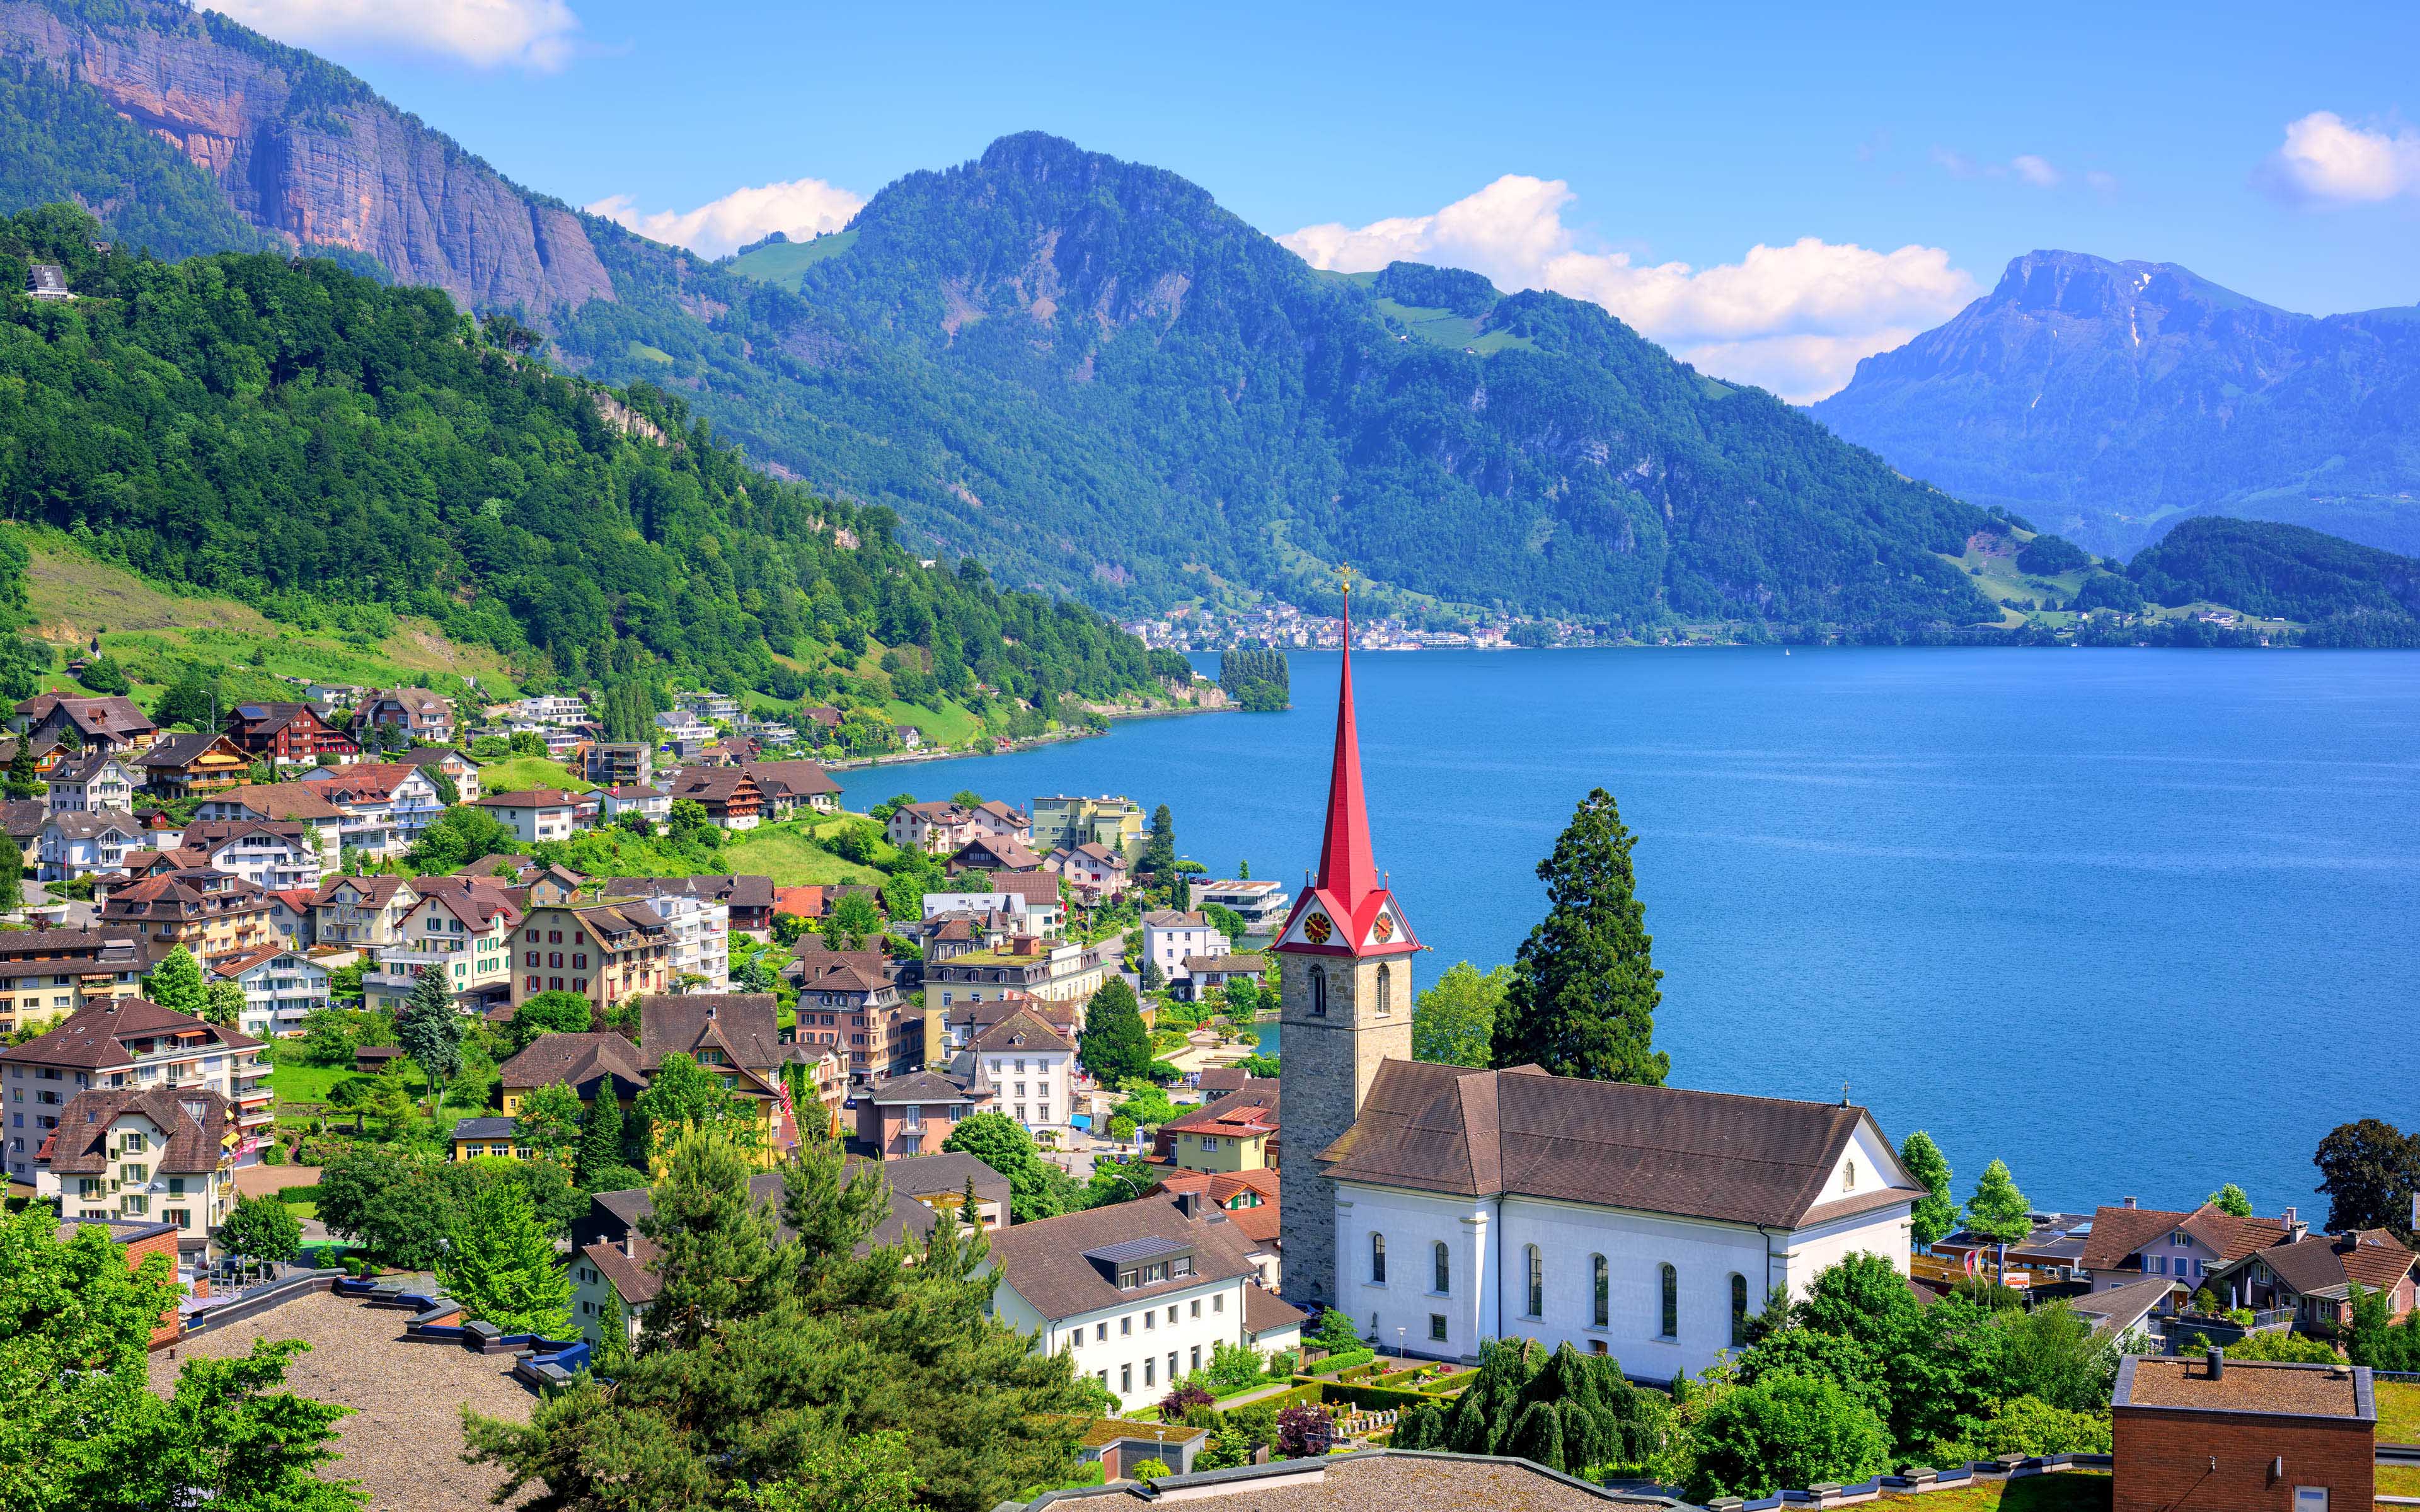 Lake Lucerne In Switzerland Little Swiss Town With Gothic Church On Lake Lucerne And Alps Photo Landscape 4k Ultra HD Wallpaper For Desktop Laptop Tablet Mobile Phones And Tv, Wallpaper13.com